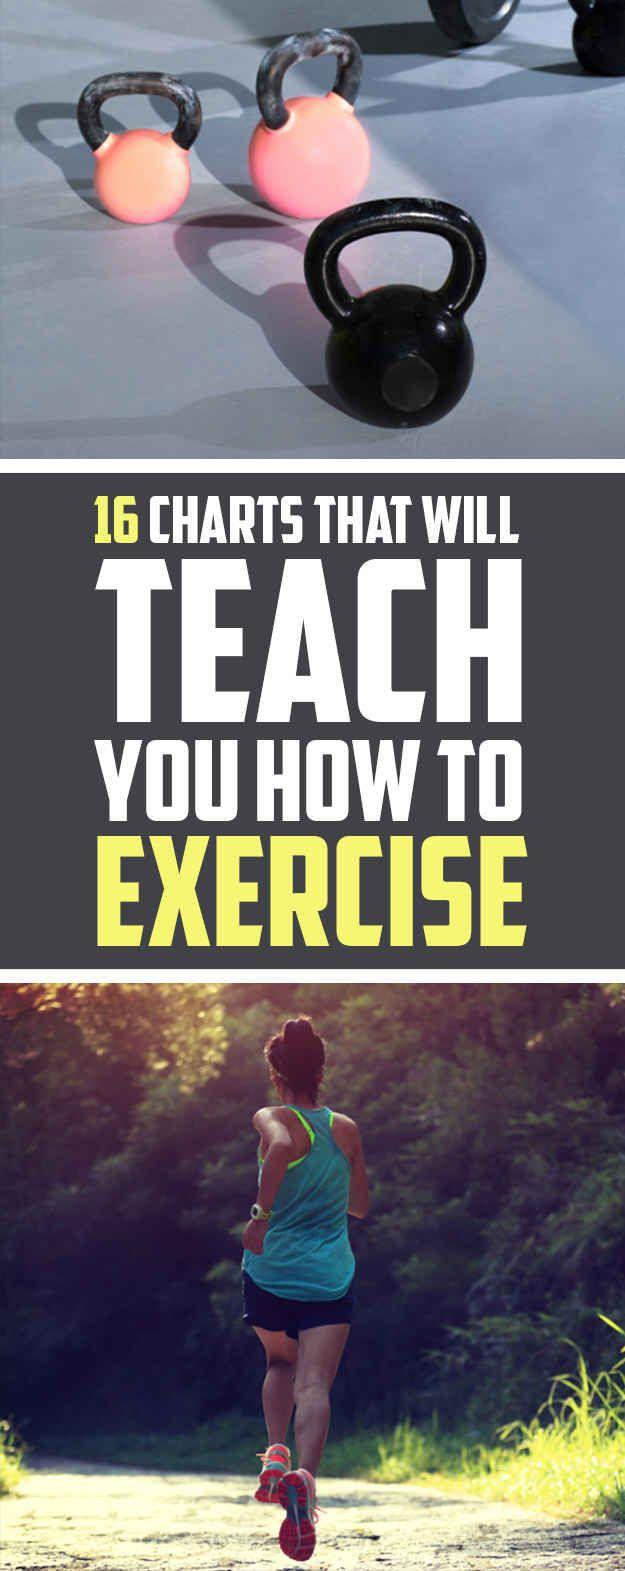 Свадьба - 16 Super-Helpful Charts That Teach You How To Actually Work Out